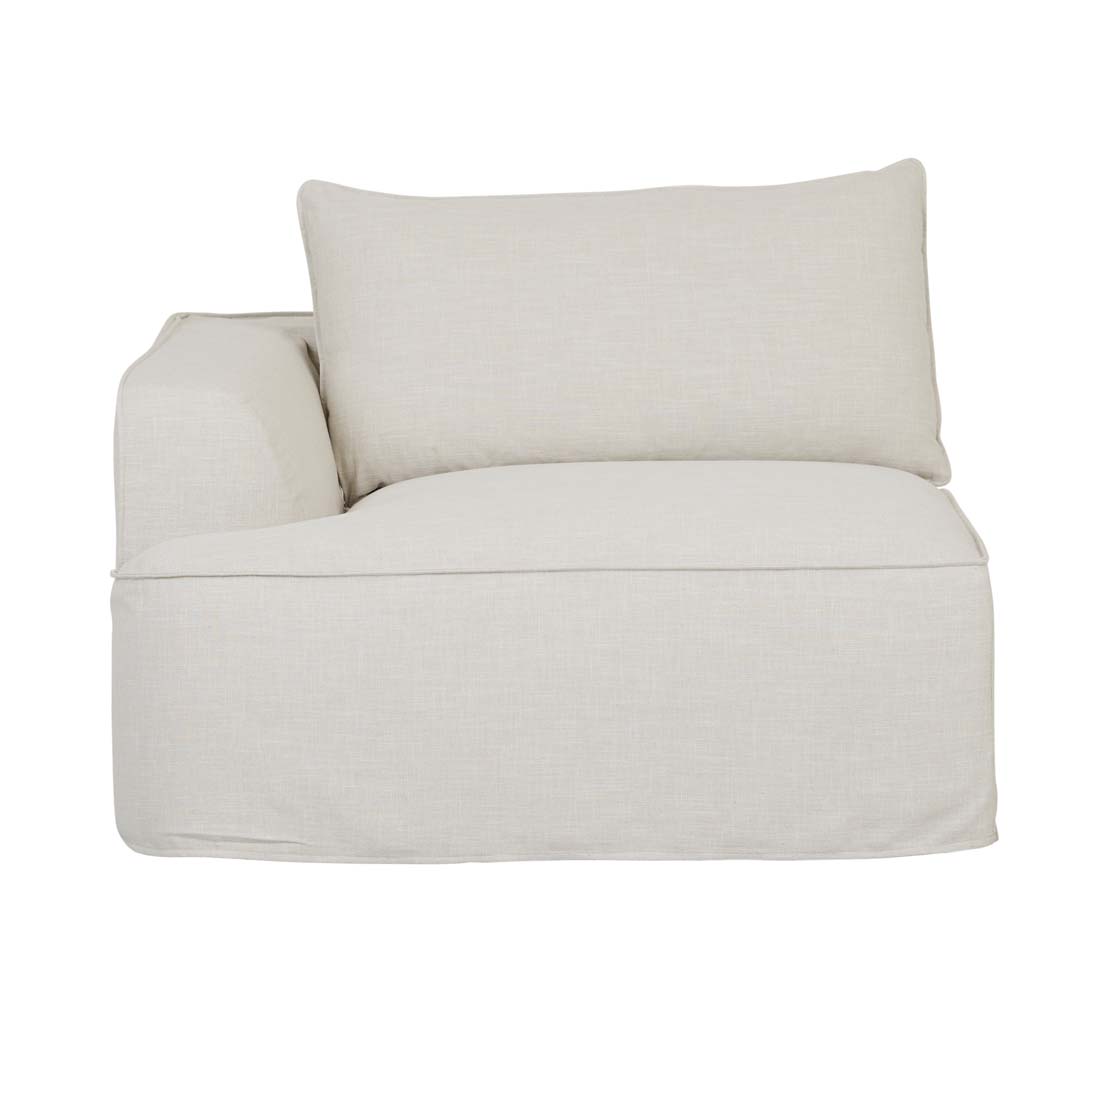 Airlie Slouch 1 Seater Left Arm Sofa